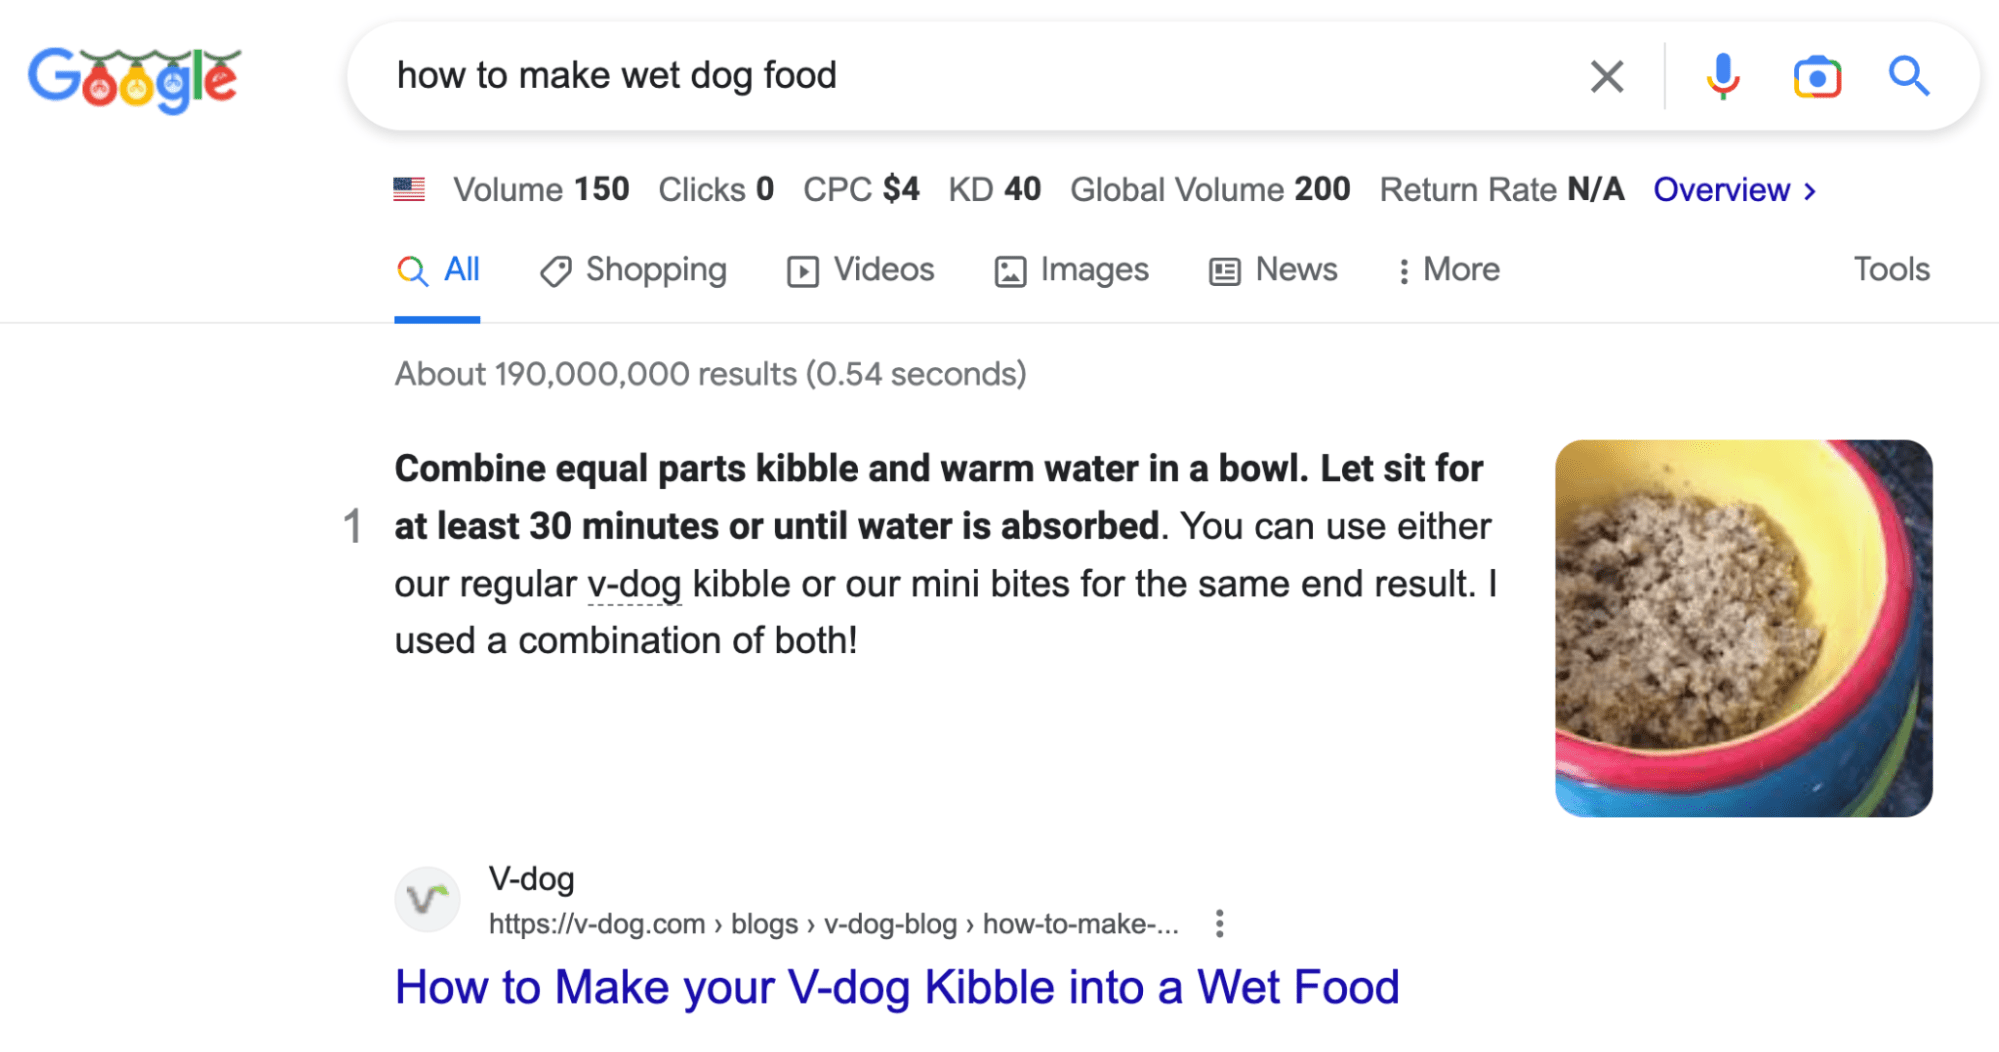 Google search results for "how to make wet dog food"